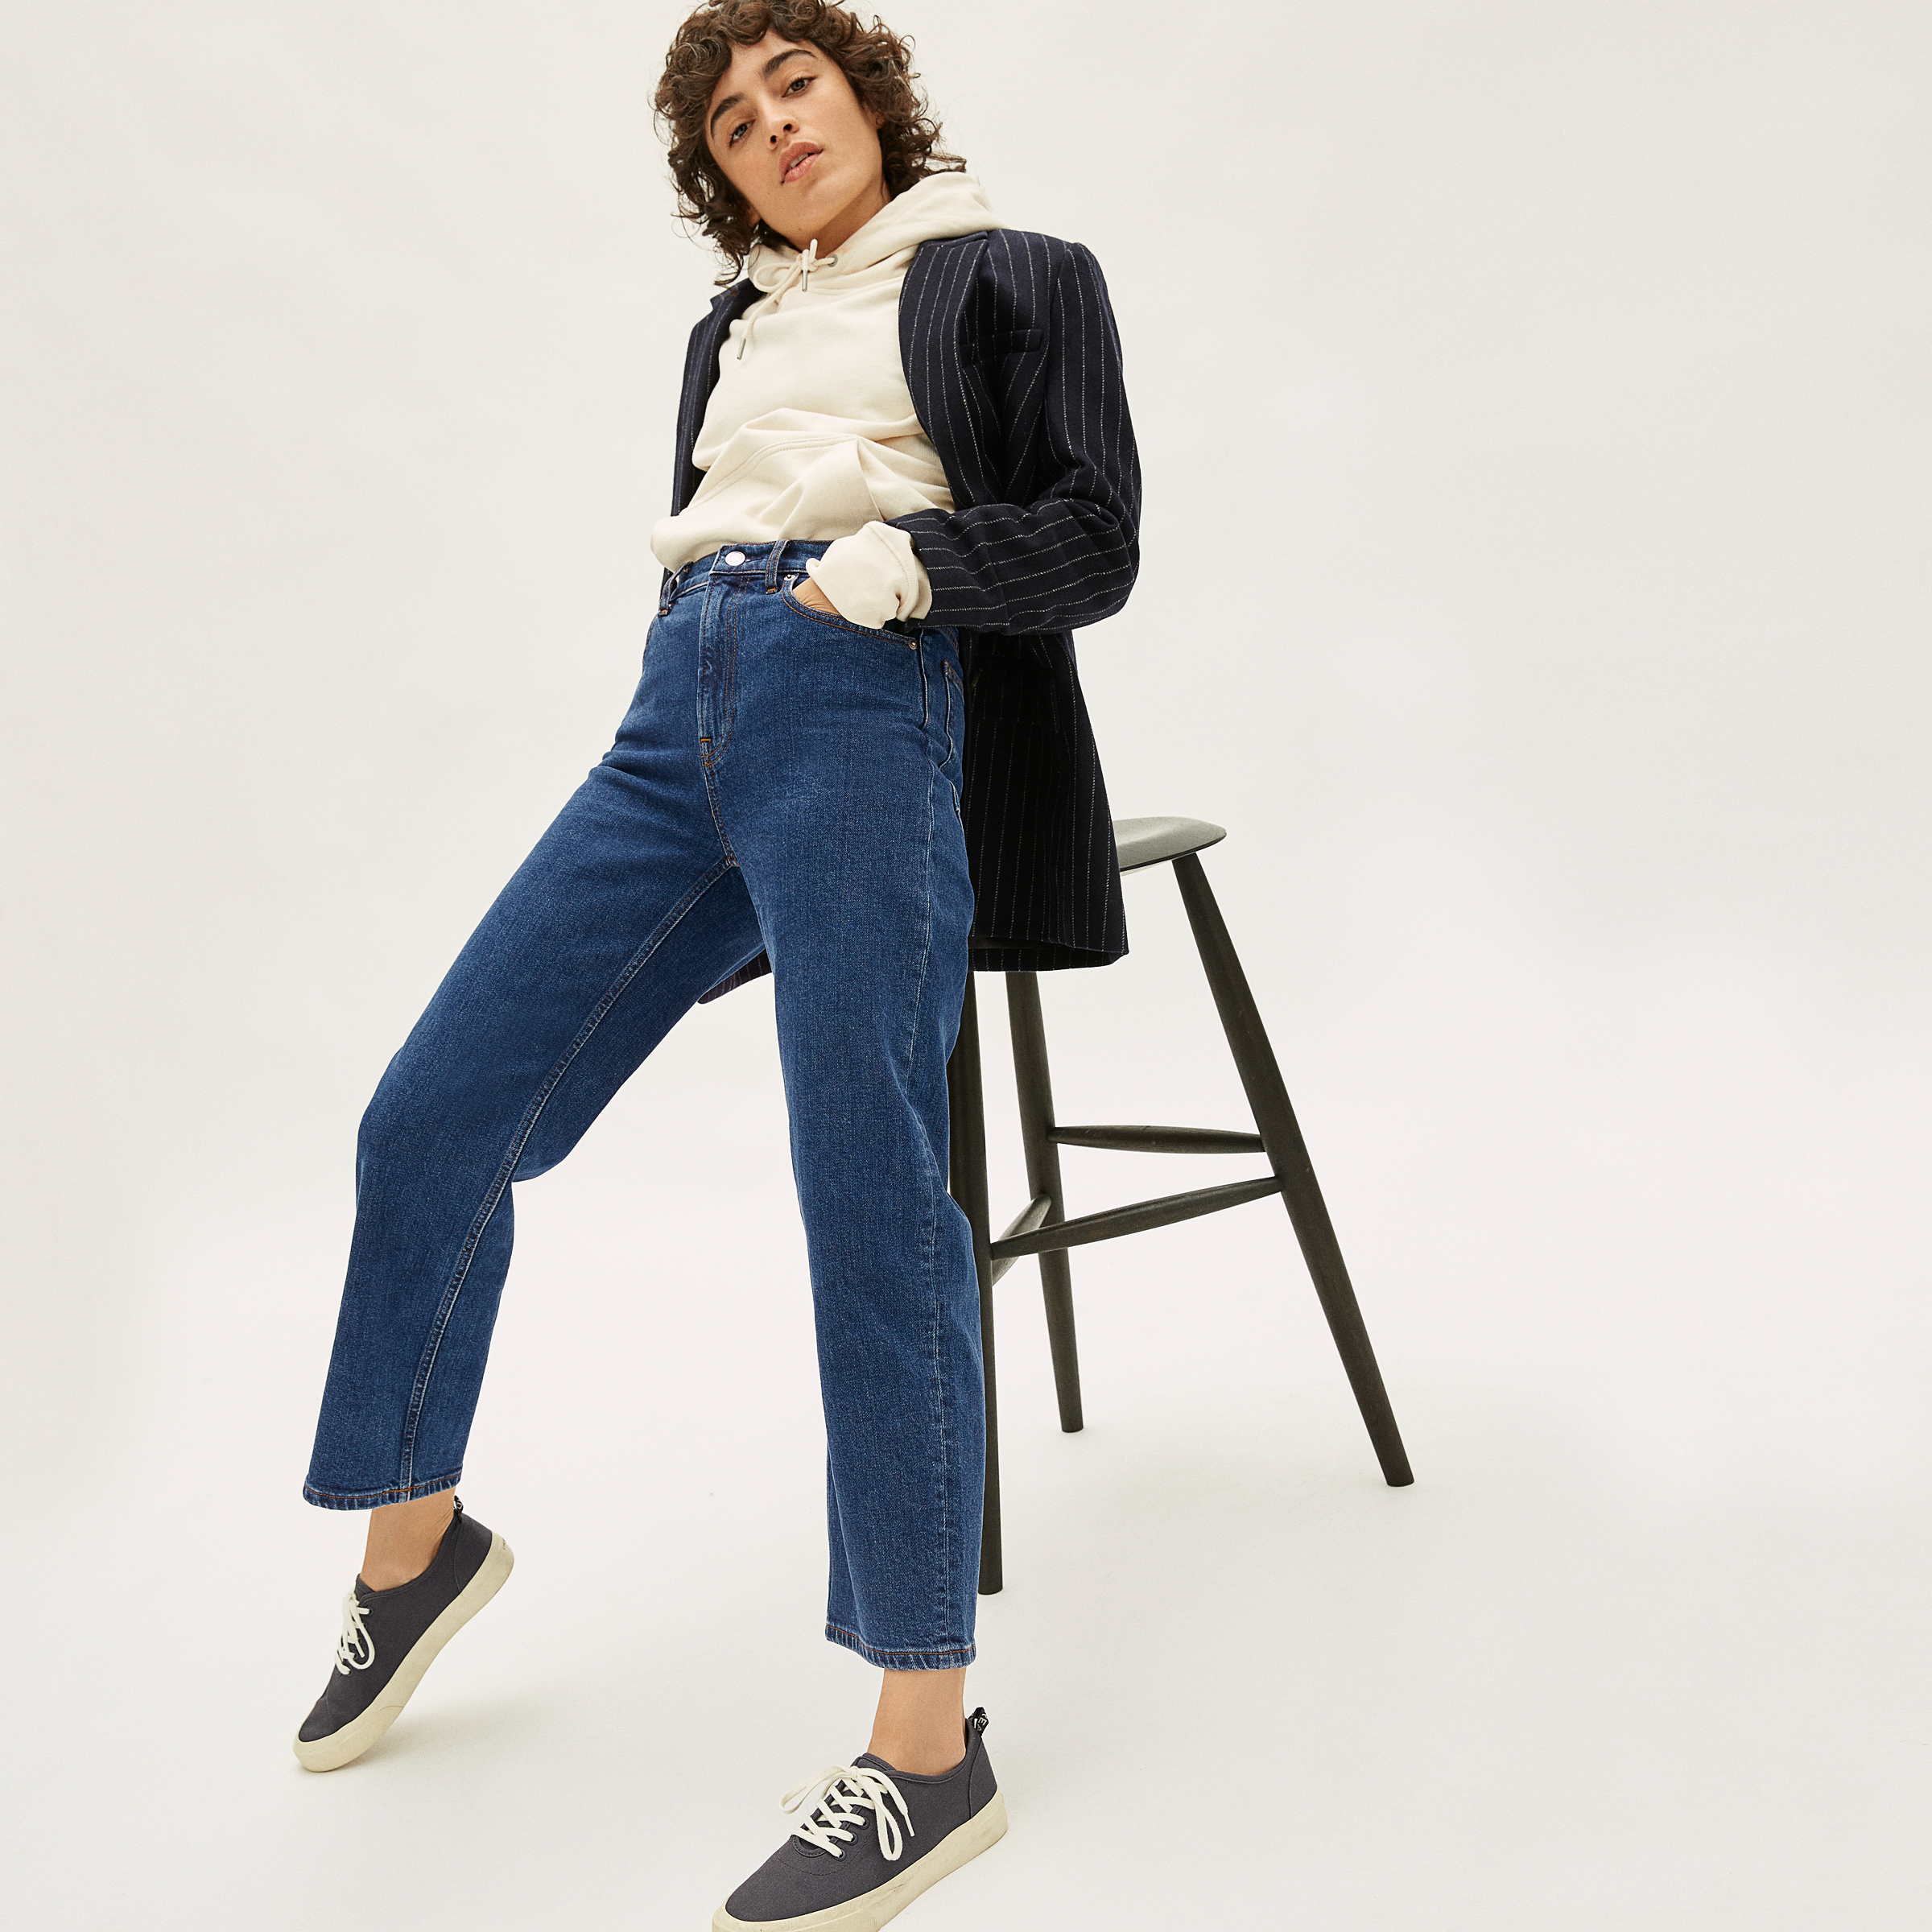 A model wearing dark blue jeans sits on a tall stool